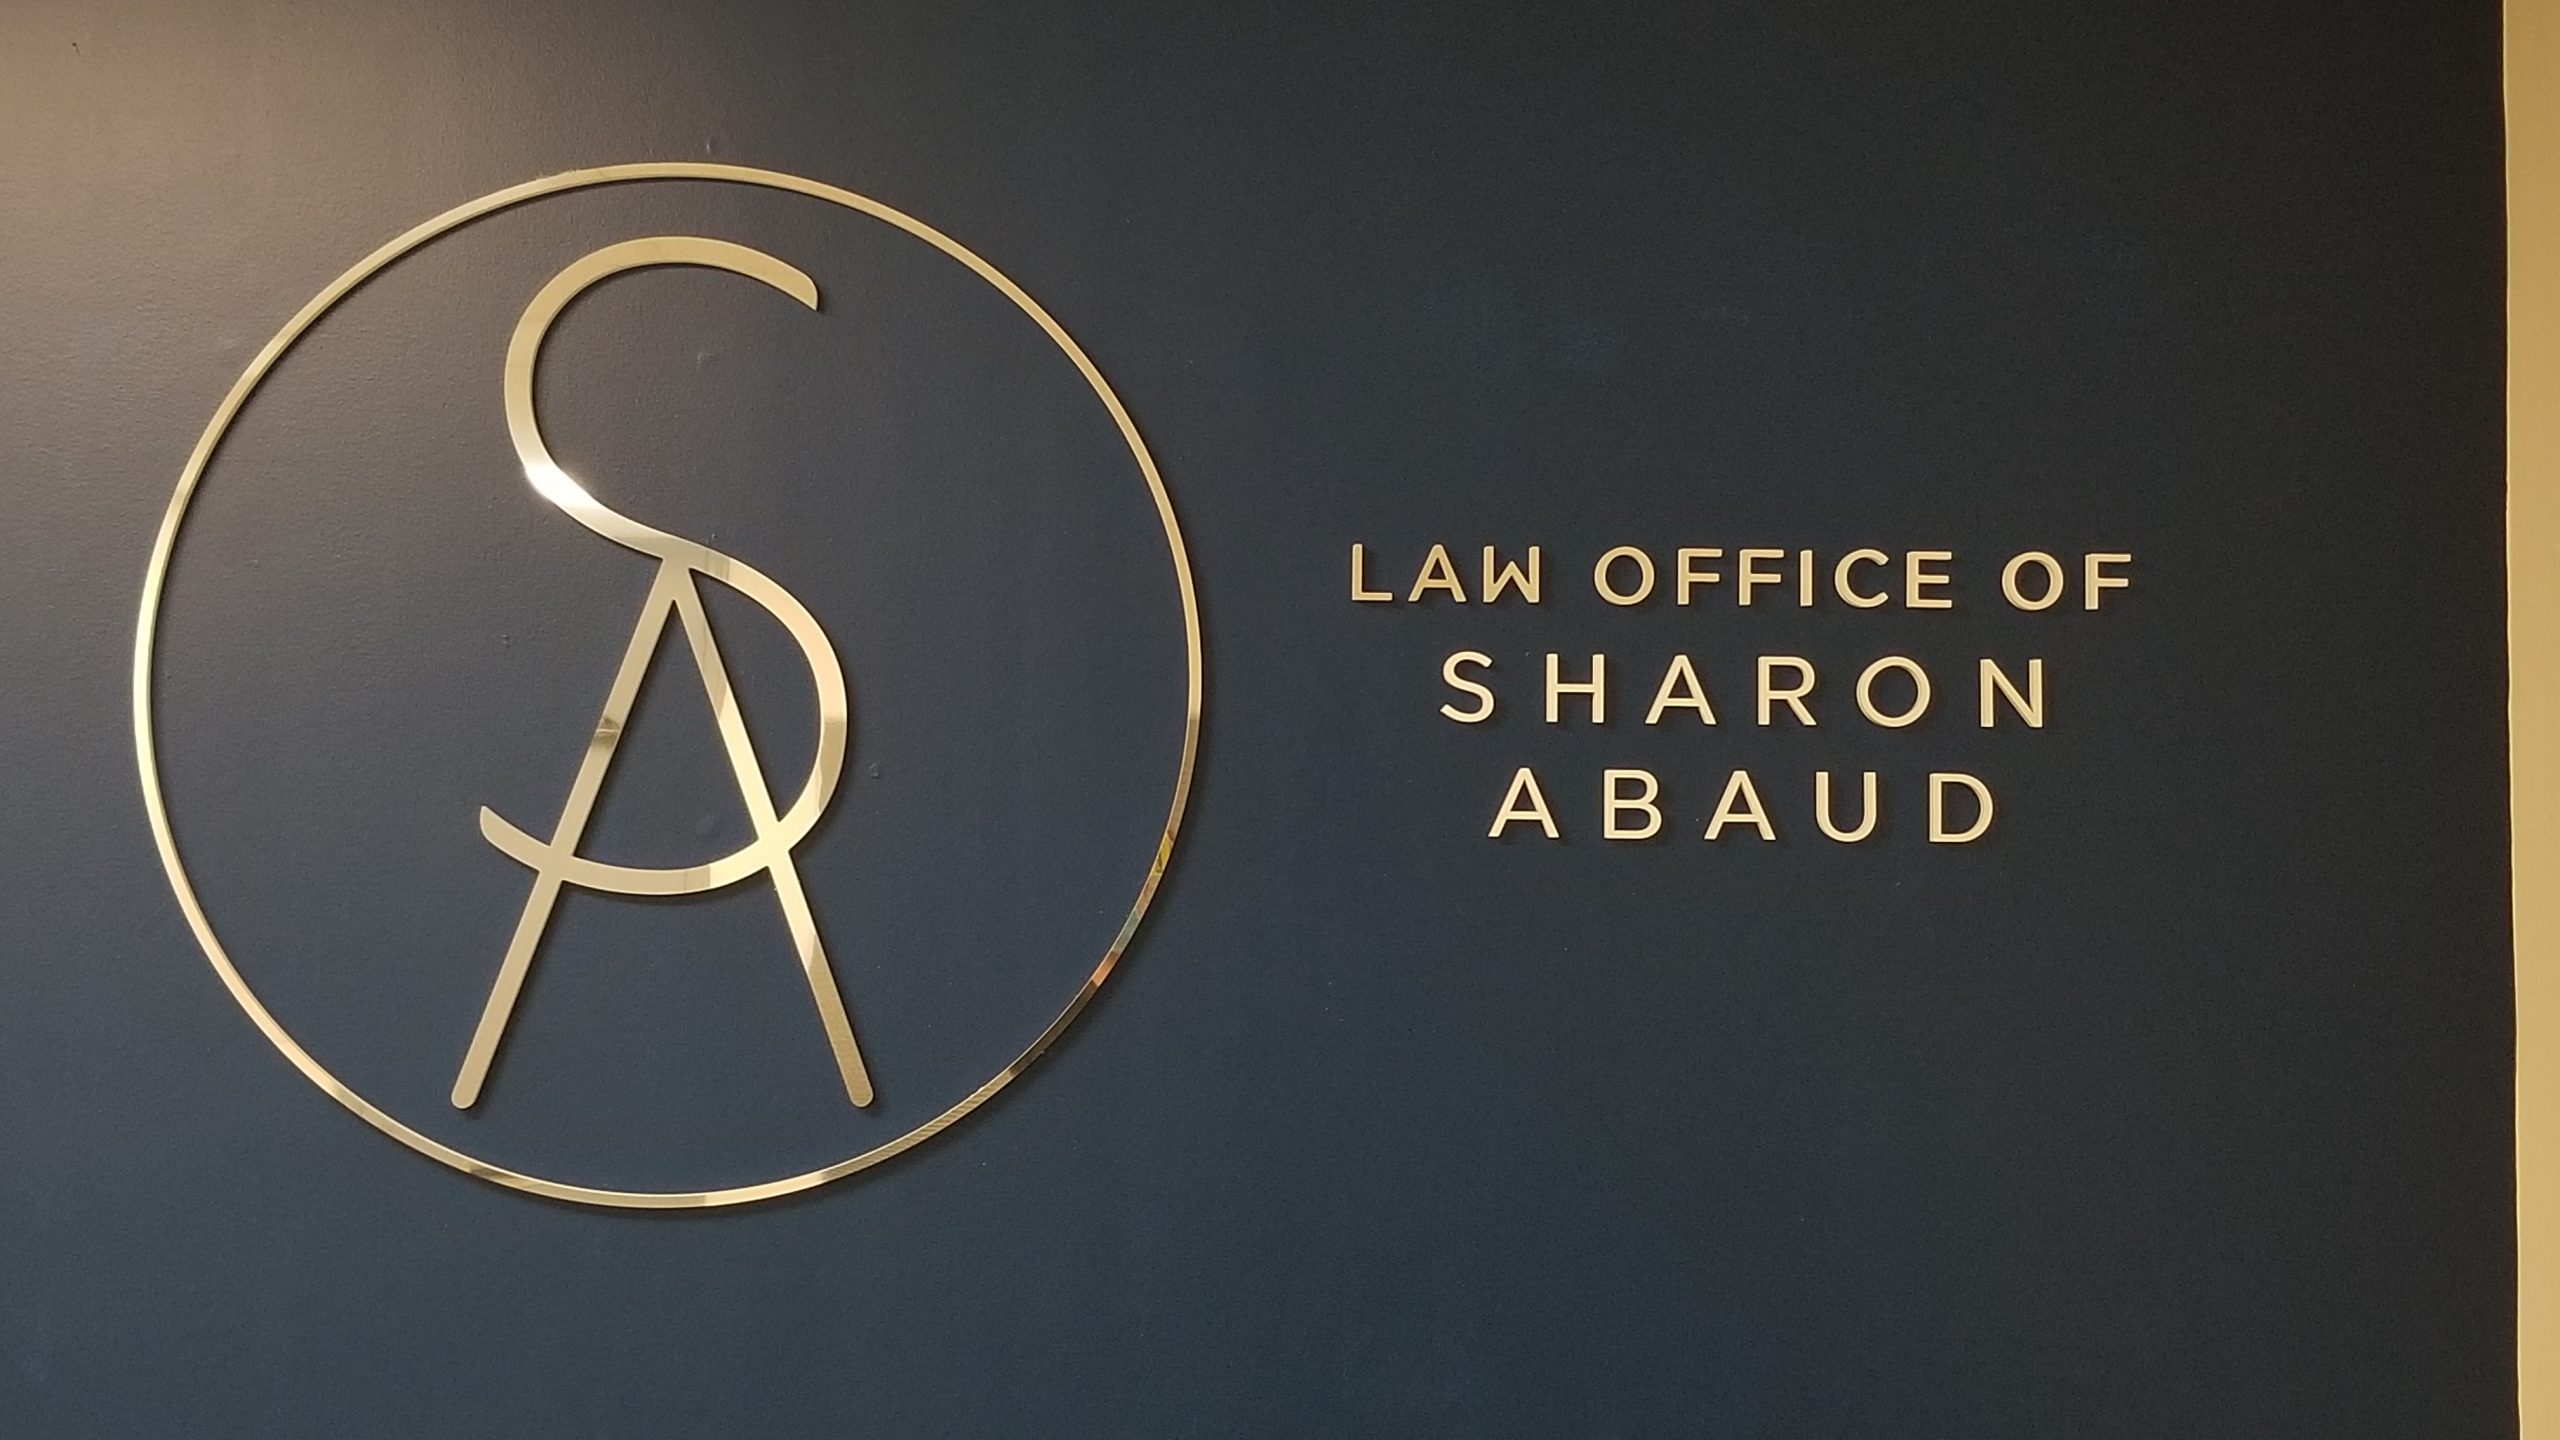 You are currently viewing Laser-Cut Acrylic Lobby Sign for Sharon Abaud in Torrance